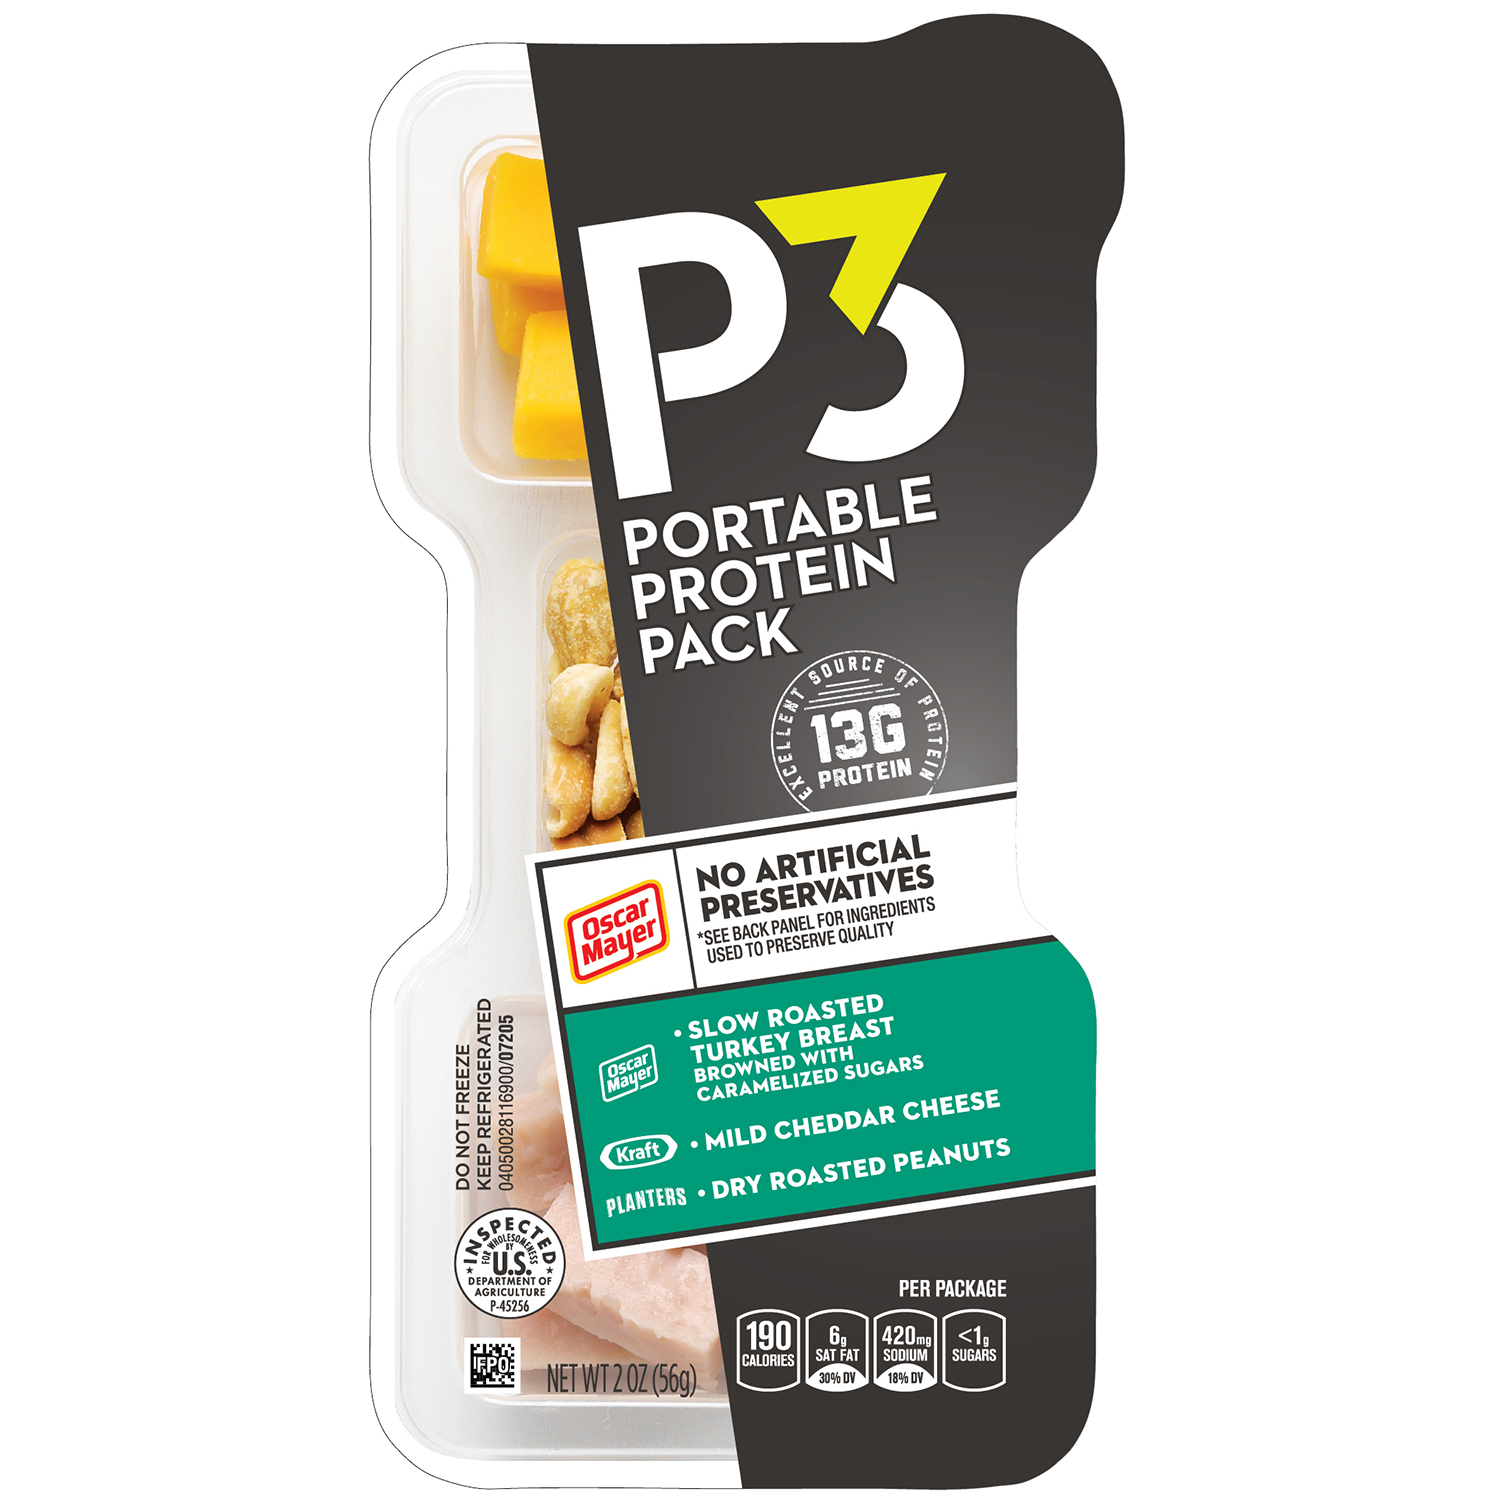 UPC 044700072059 product image for Turkey Breast/Cheddar Cheese/Peanuts Portable Protein Pack 2 OZ TRAY | upcitemdb.com